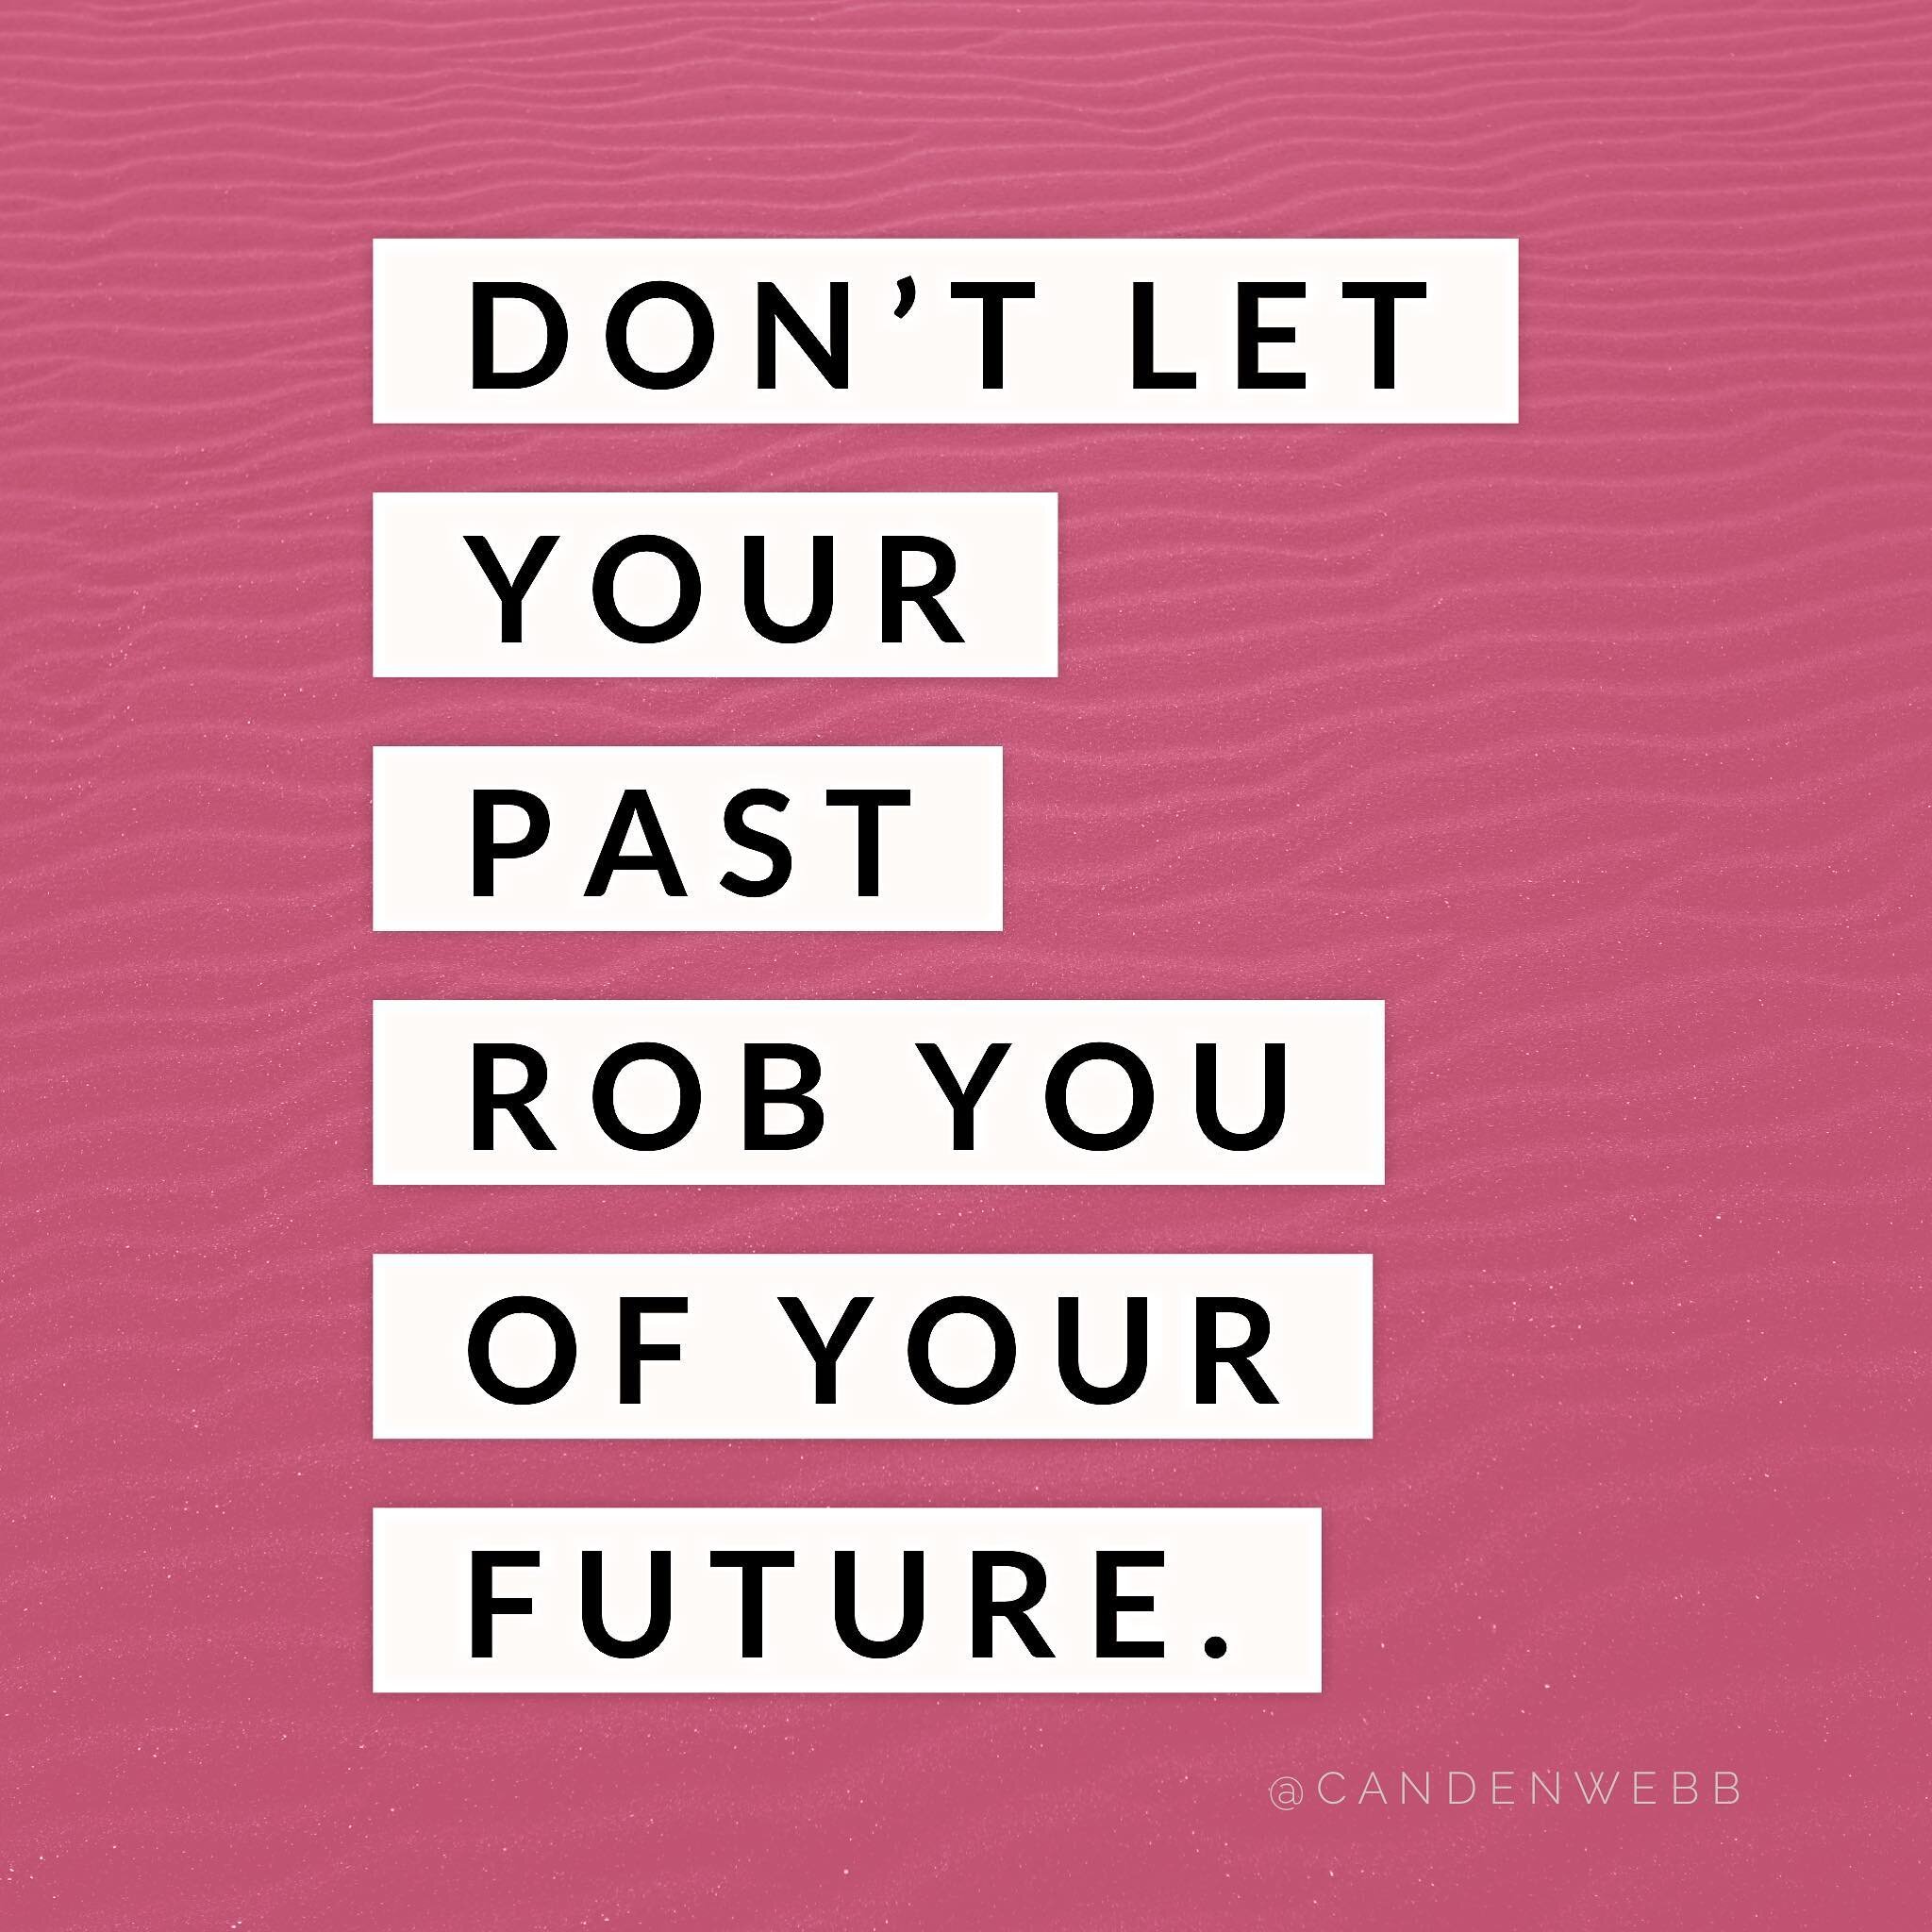 When Lot&rsquo;s wife looked back she taught us a very good lesson about being salty and stagnant. 

What if you refused to look back? What if you let the past stay there? What if you lived for NOW? And truly believed He has made all things NEW for y